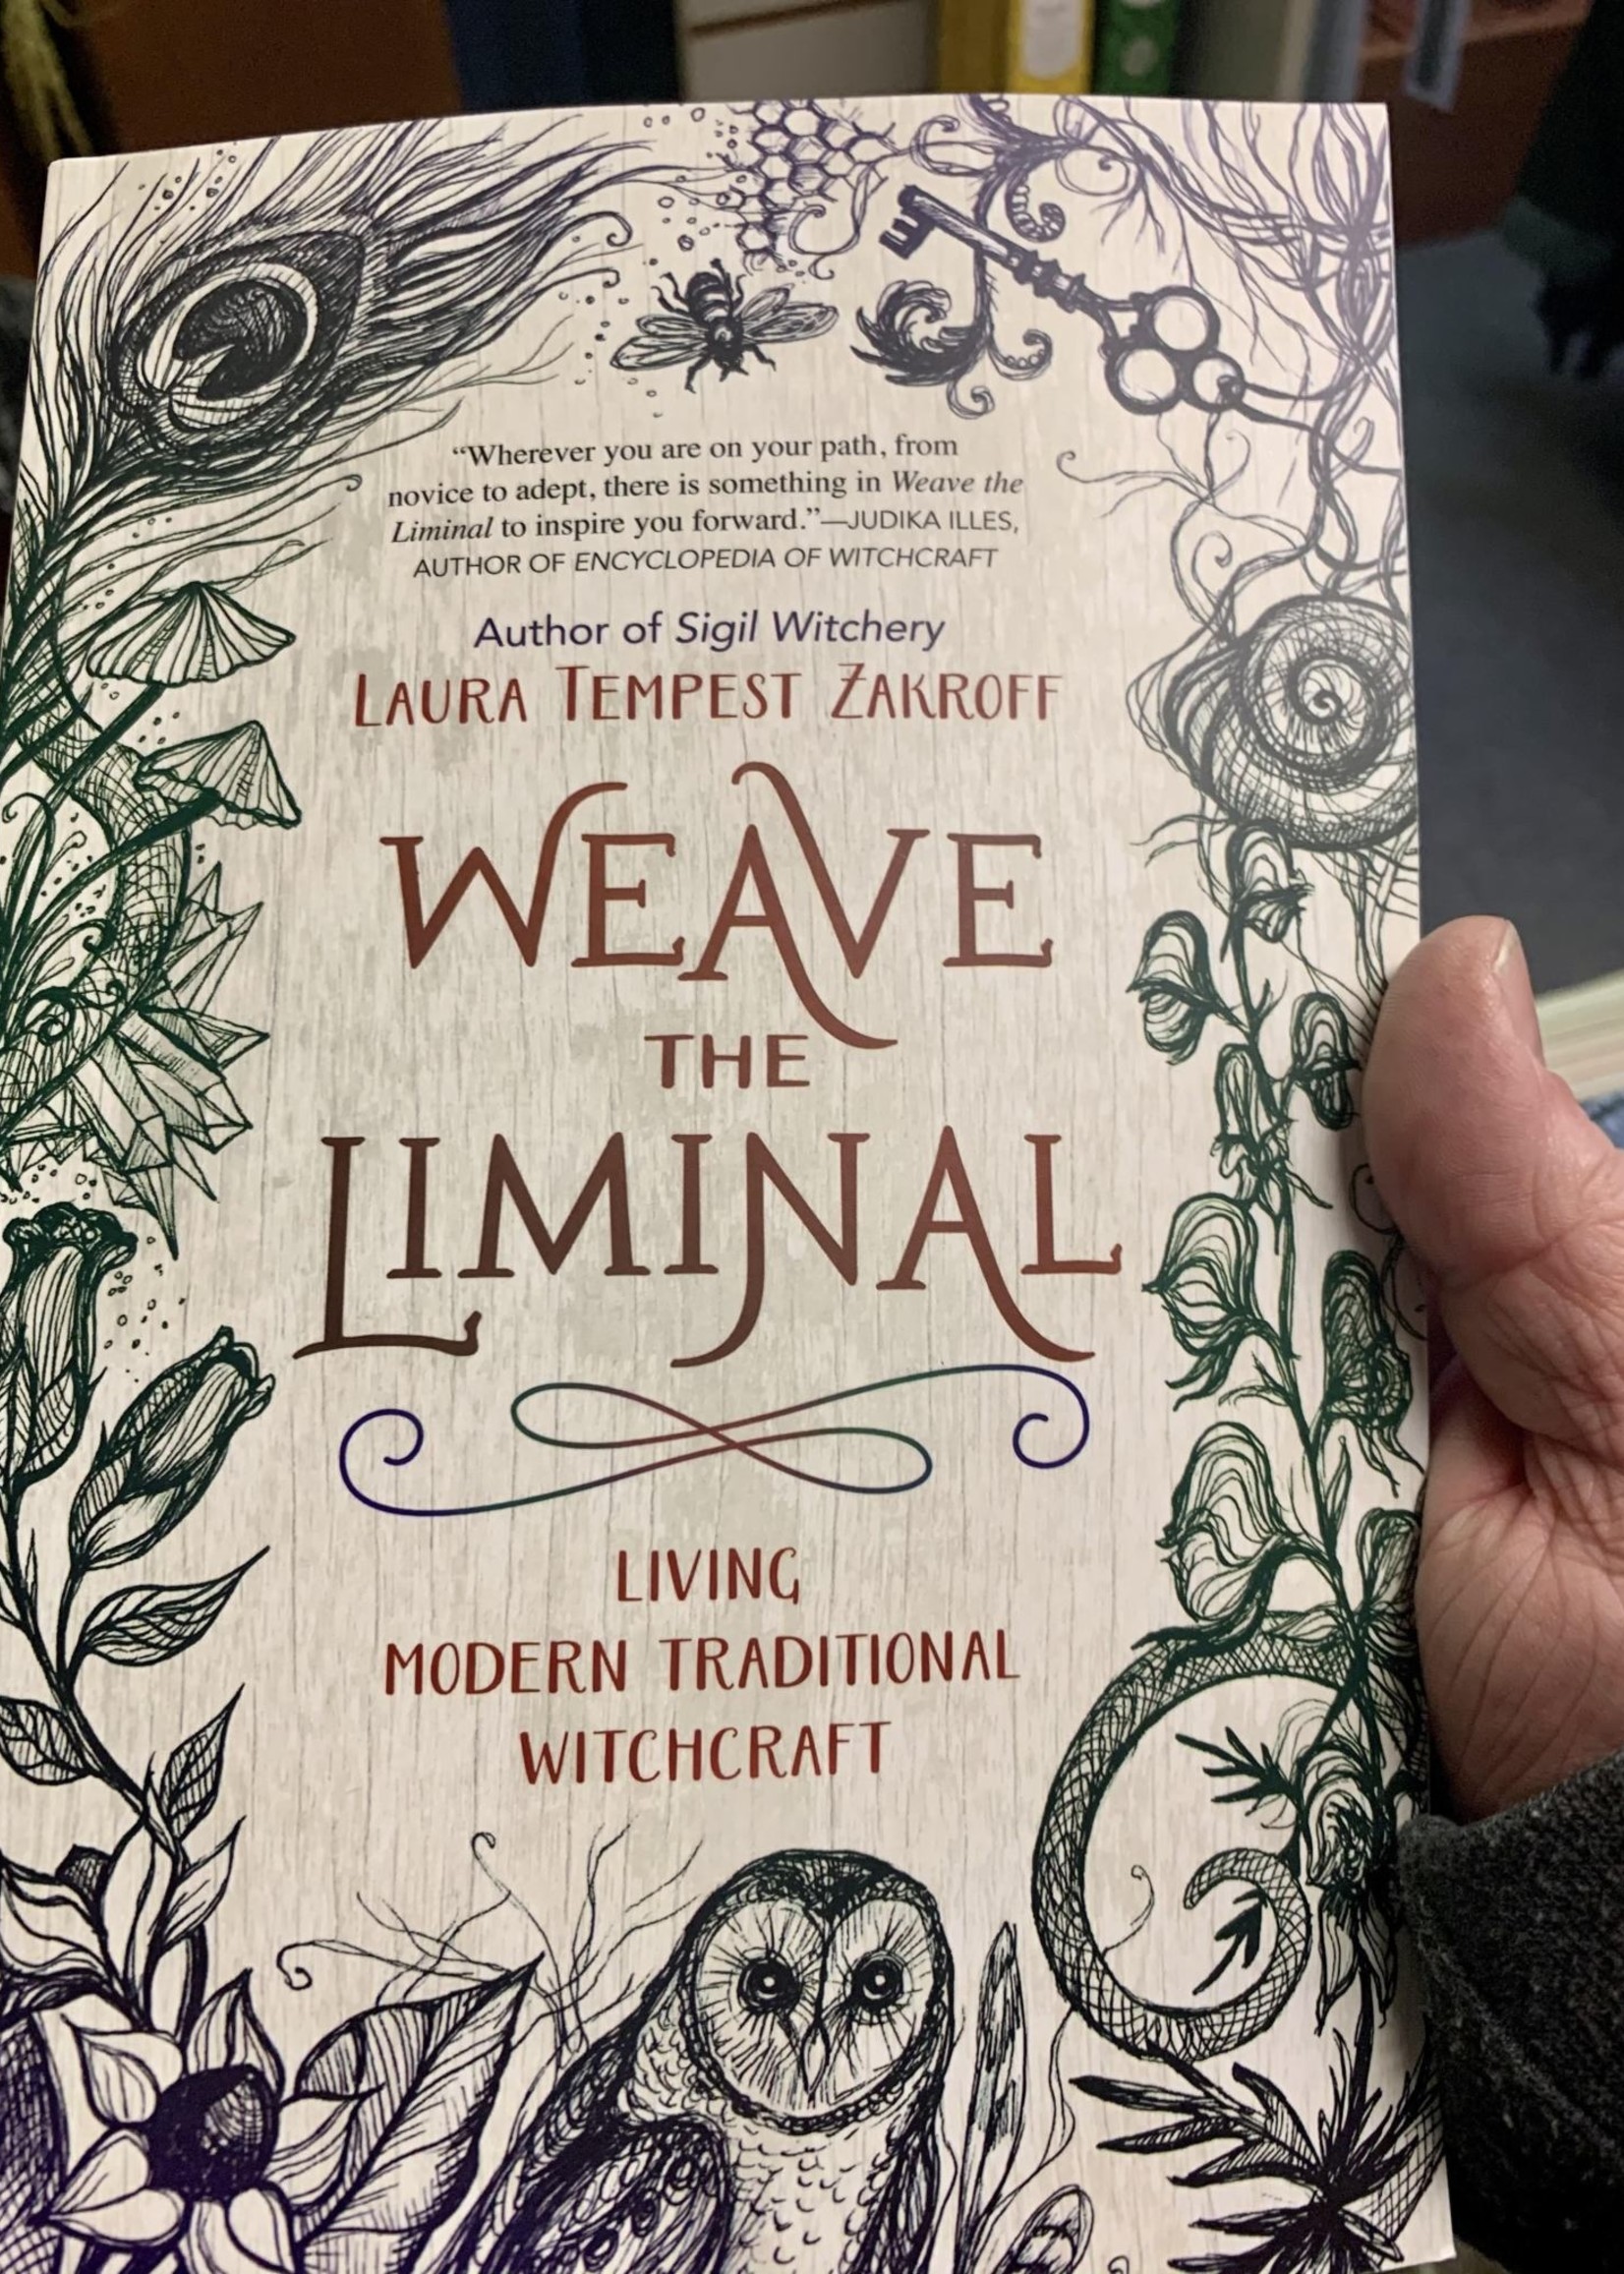 Weave the Liminal - BY LAURA TEMPEST ZAKROFF